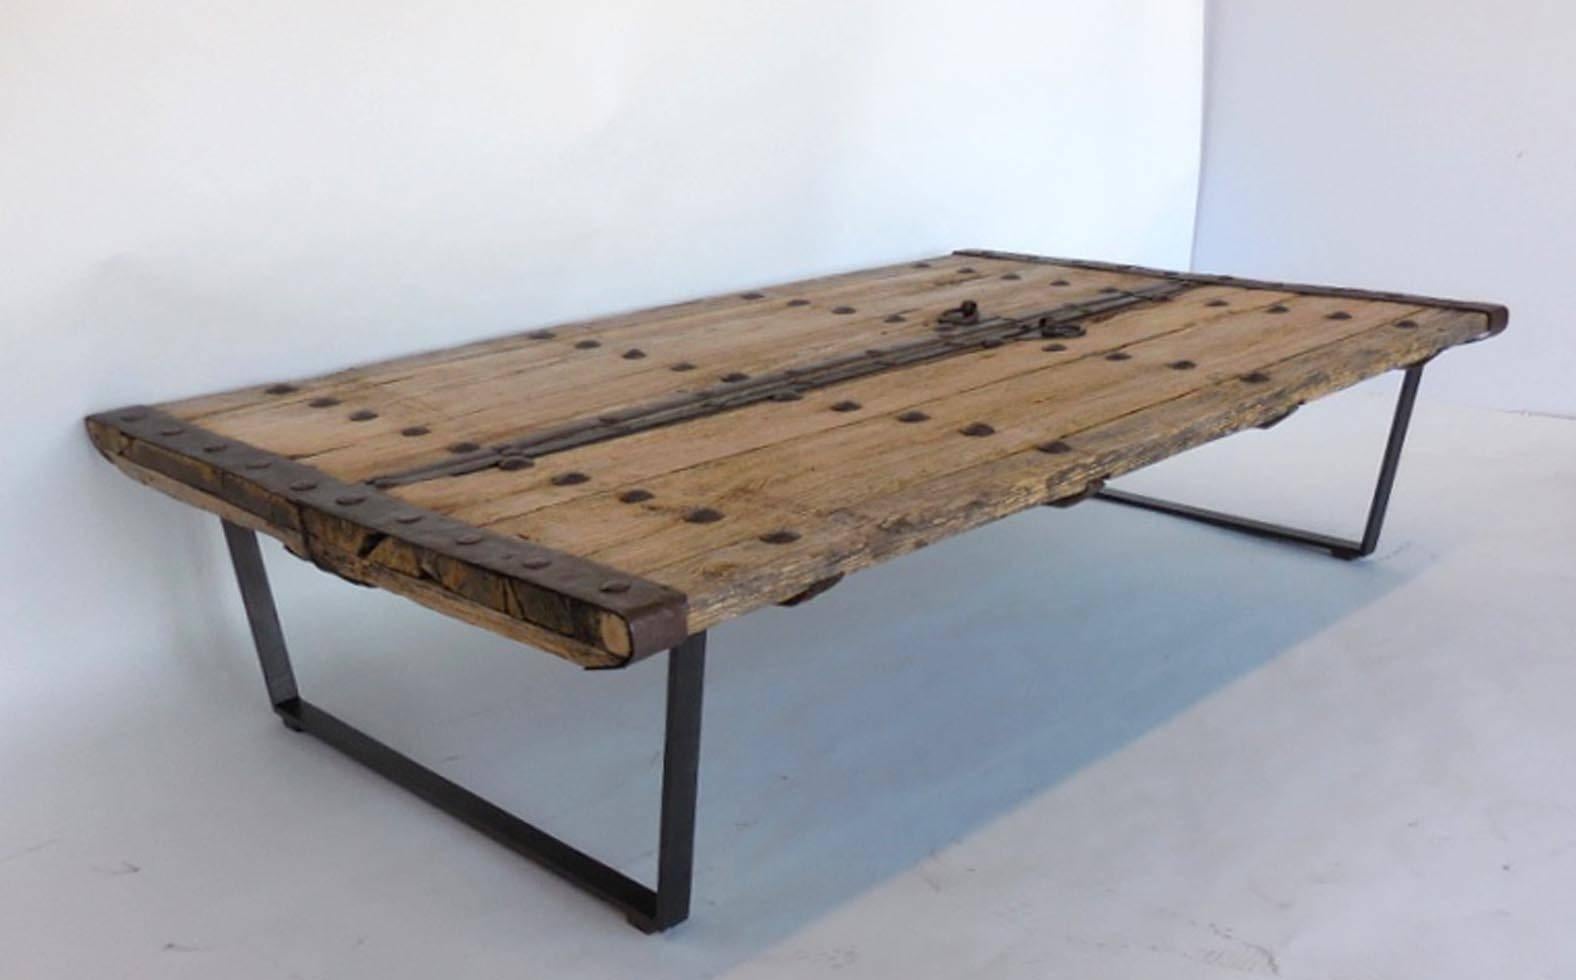 18th century elm doors with old nails from Japan upon contemporary hand-forged iron base. Good weathered grey-light brown natural faded finish. Handsome table, smooth and beautifully worn. Sturdy and functional. Original chain hardware door closure